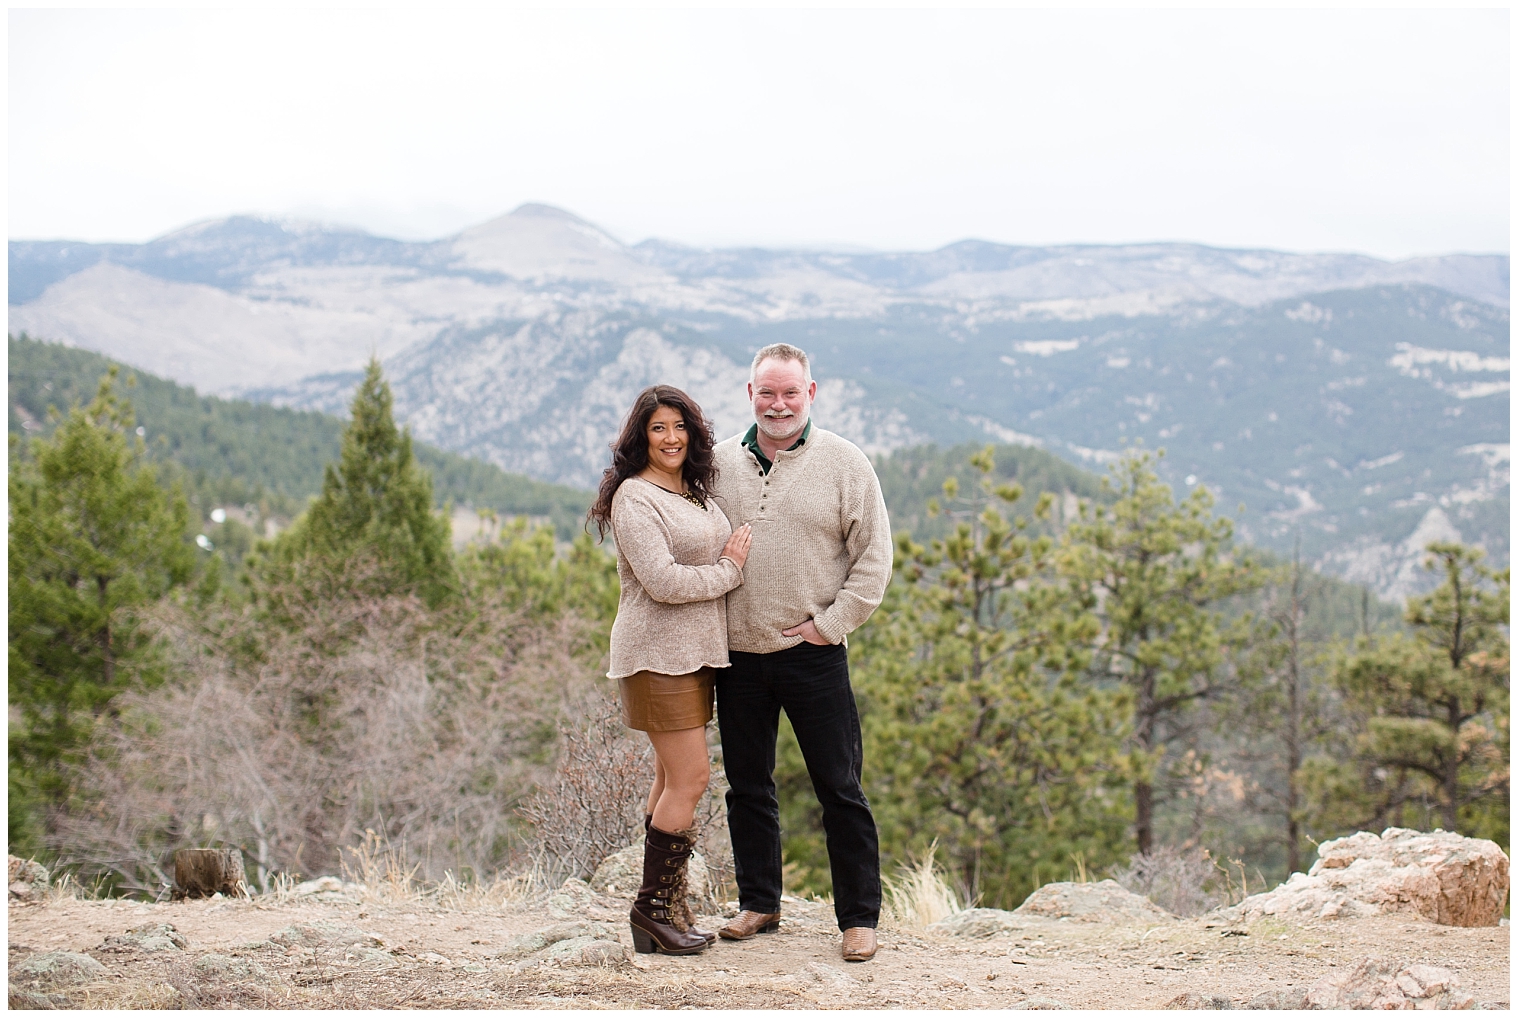 Man and woman stand together with mountain views behind them at their Breckenridge engagement session.